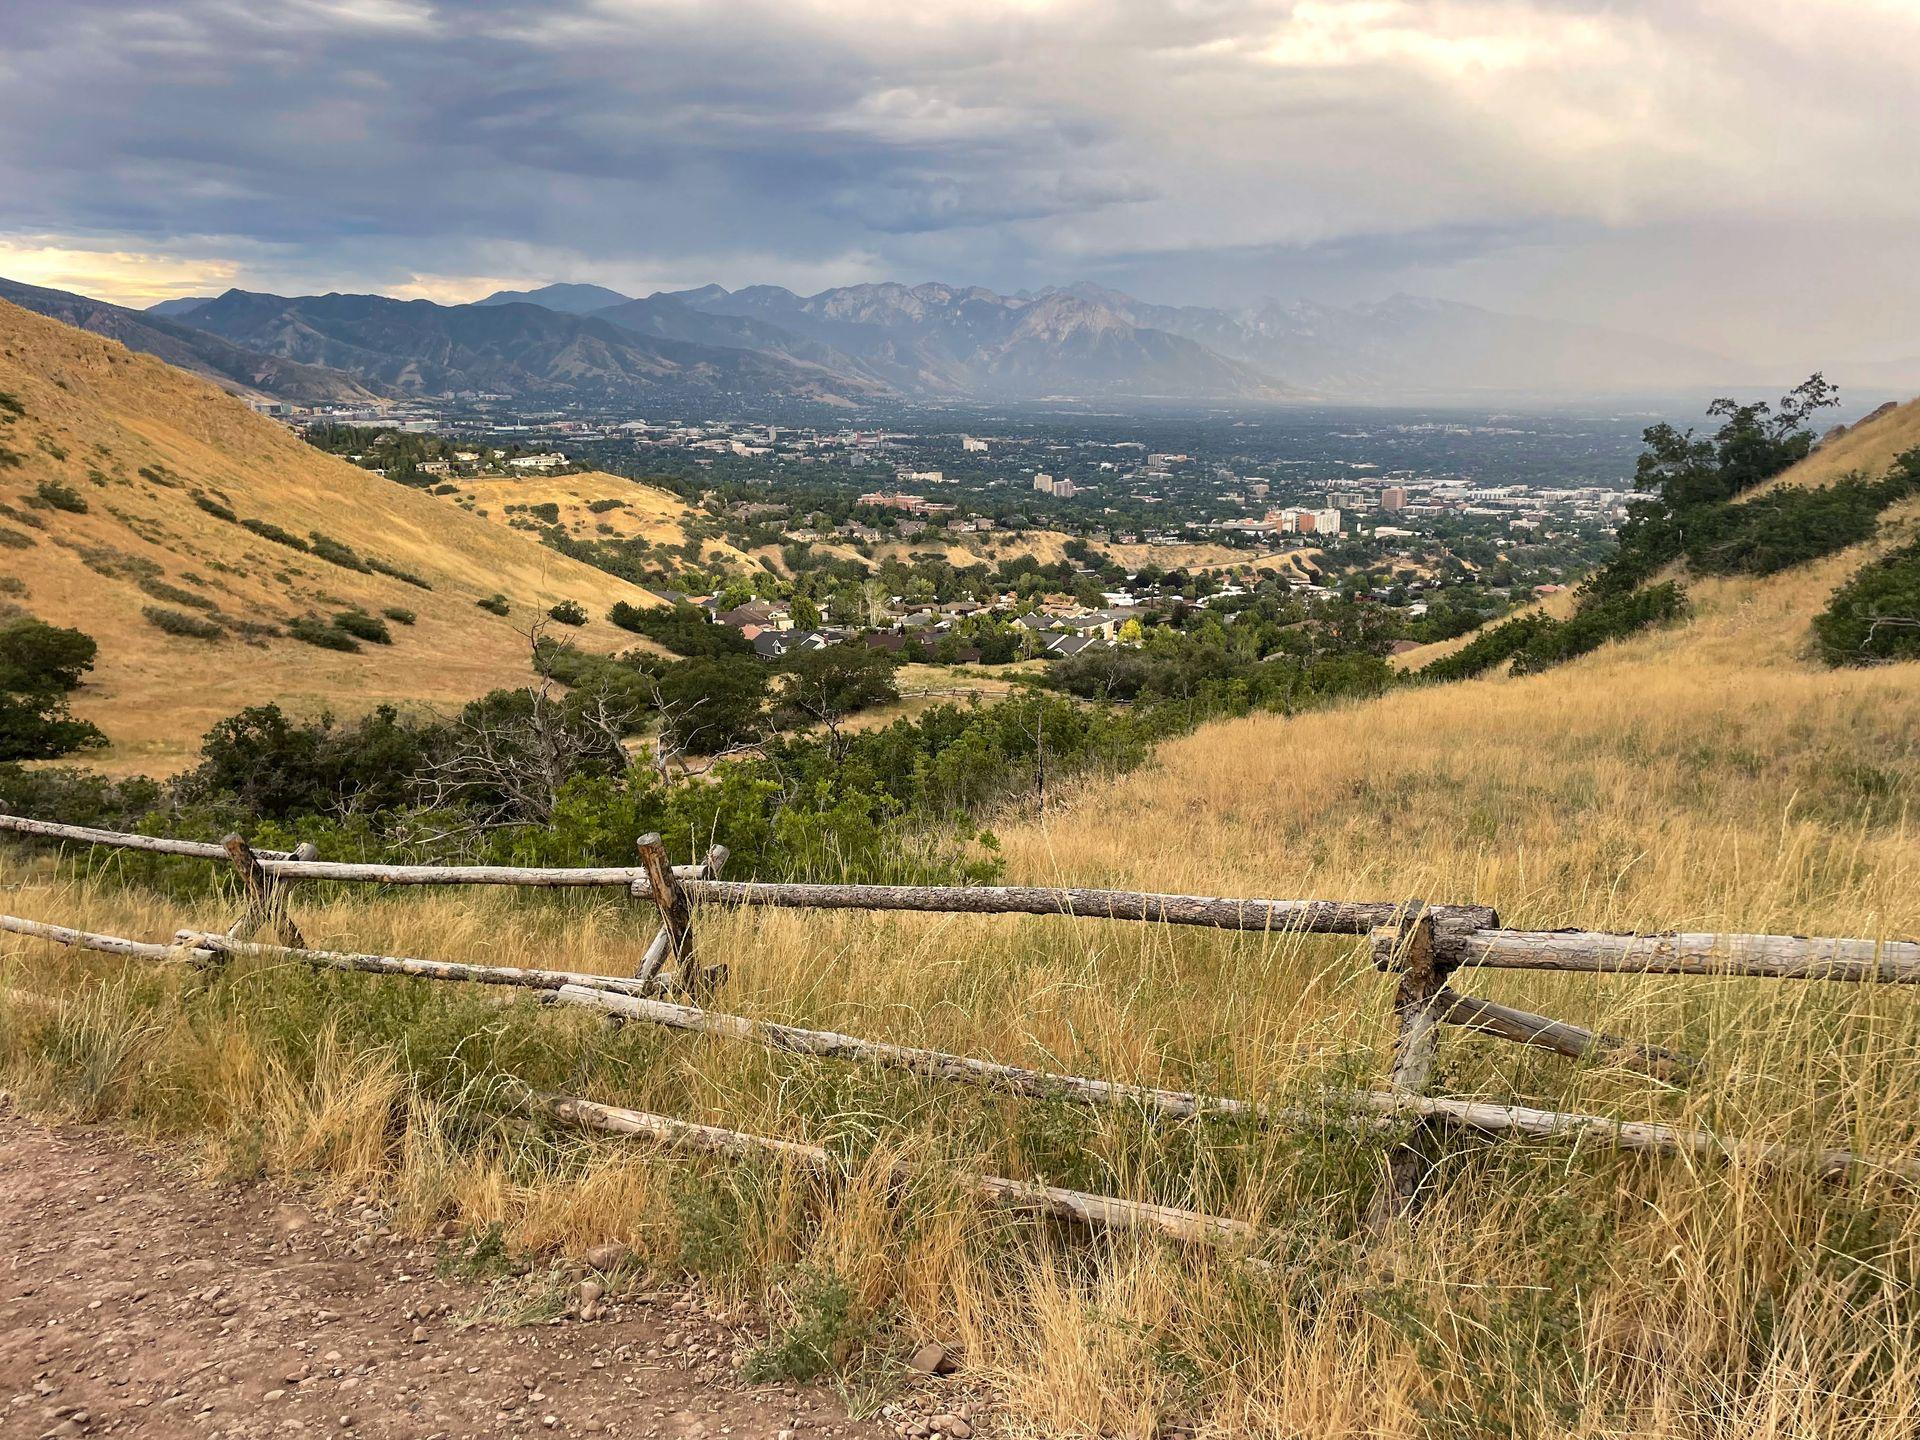 A view from the Ensign Peak trail with yellow hillsides, a city and mountains in the distance.